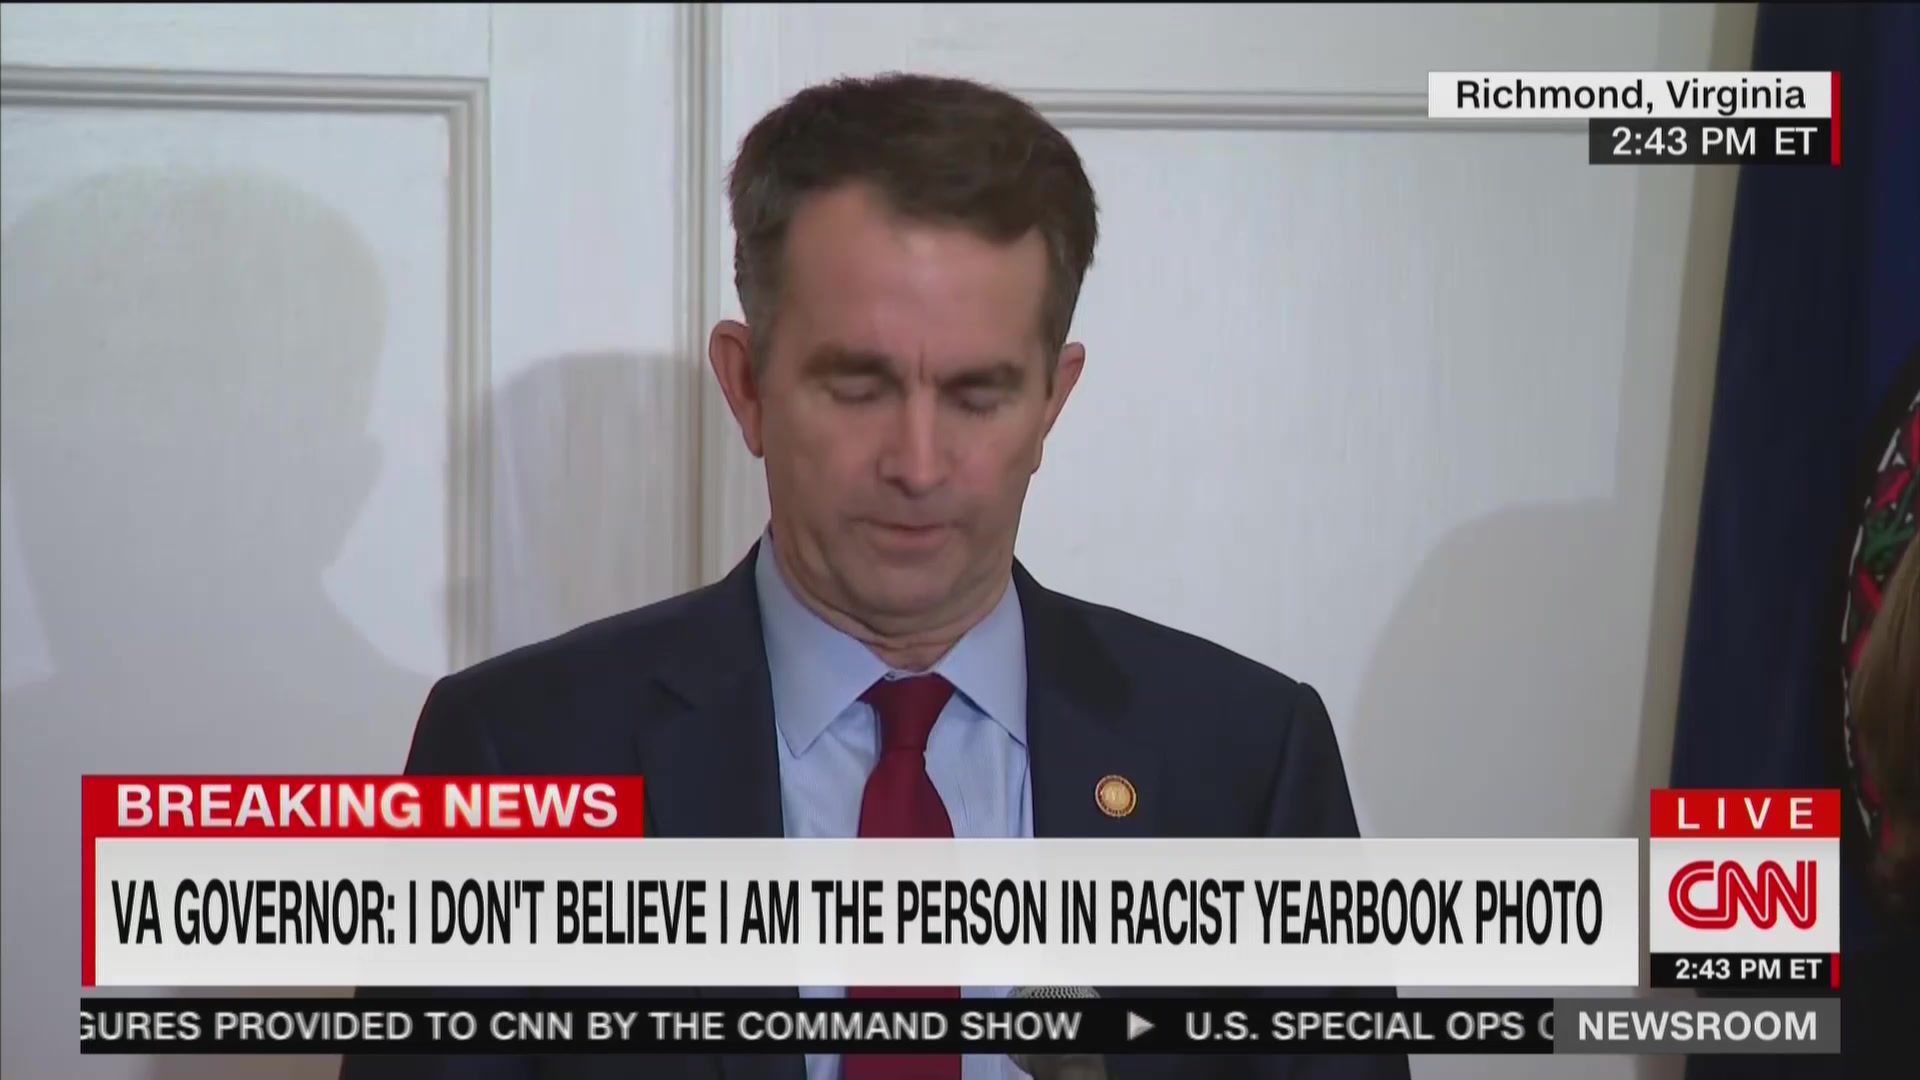 Ralph Northam’s Remarkable Two-Day Skid: From Abortion Voice of Reason to Racist, Lying Idiot